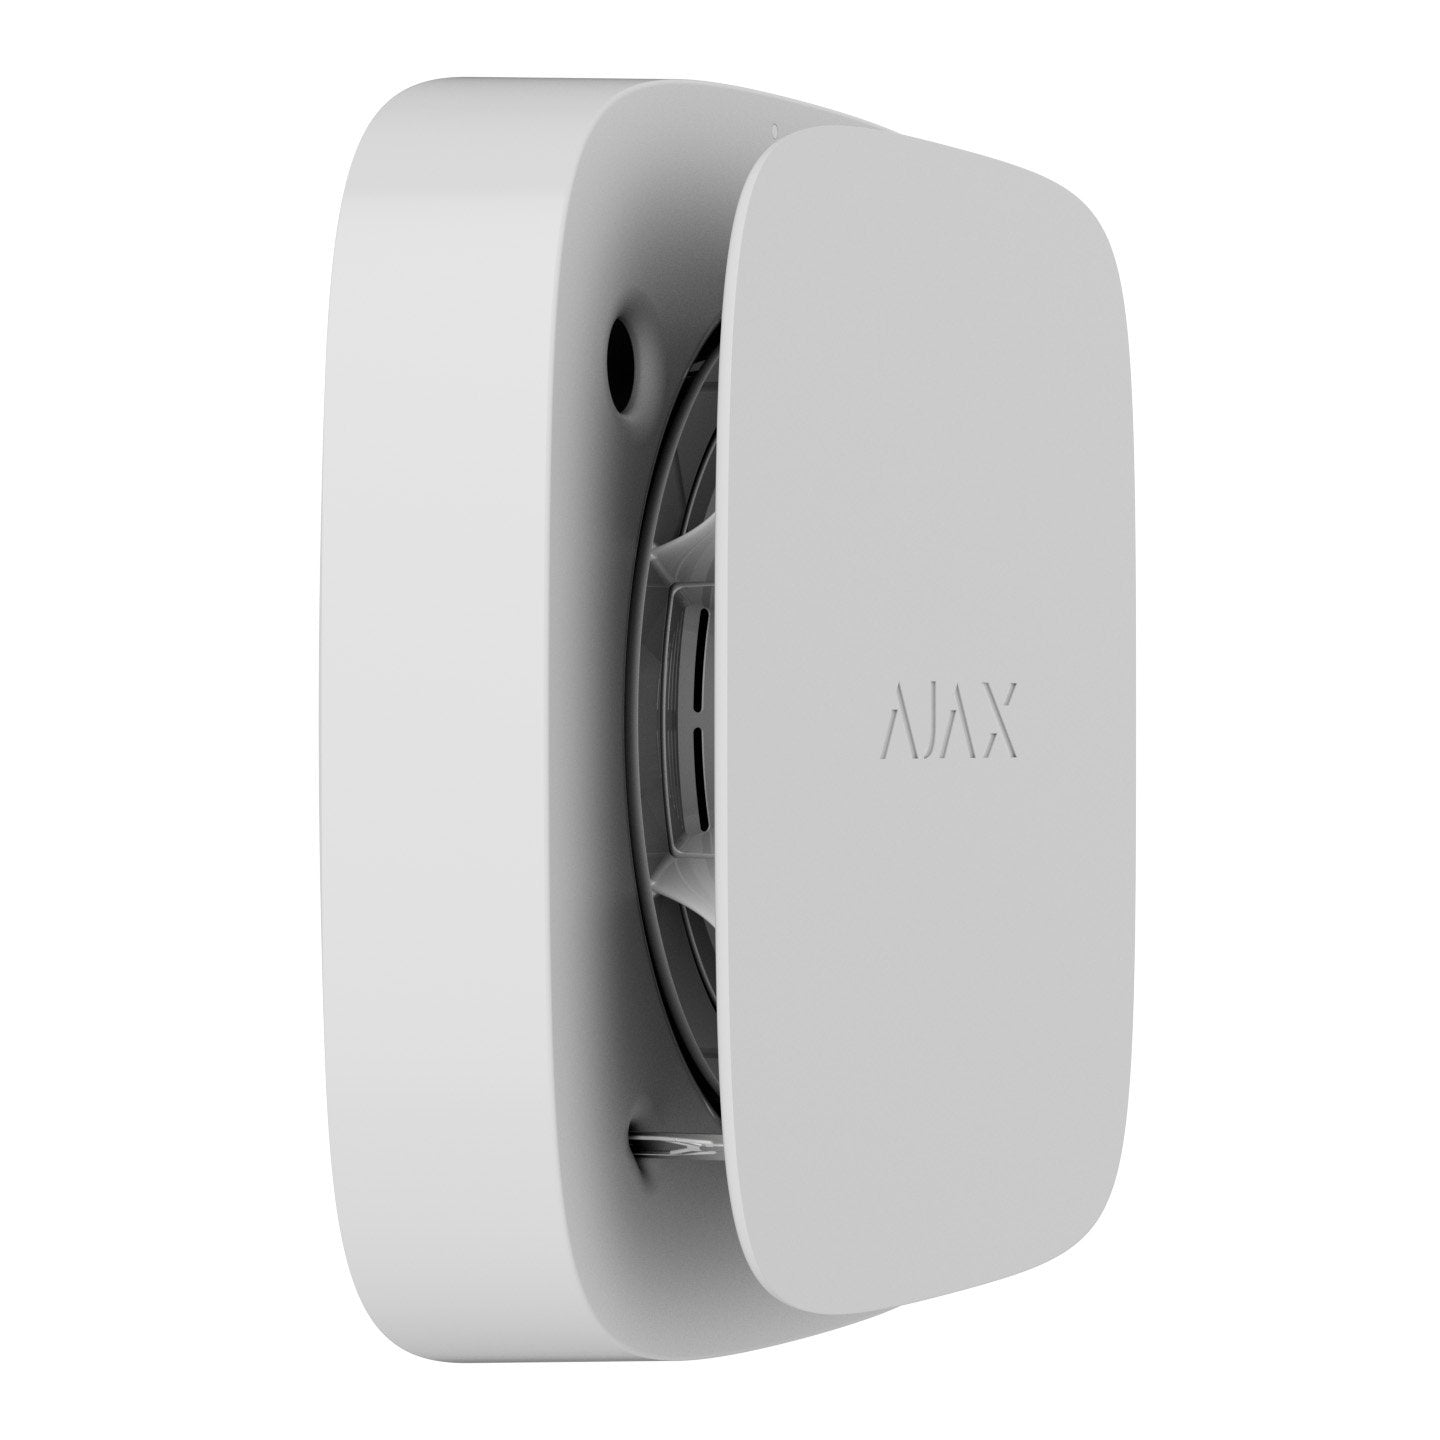 Ajax Fireprotect 2 WHITE - Wireless Carbon Monoxide Smoke & Heat Detector With Sealed Battery And Sounder